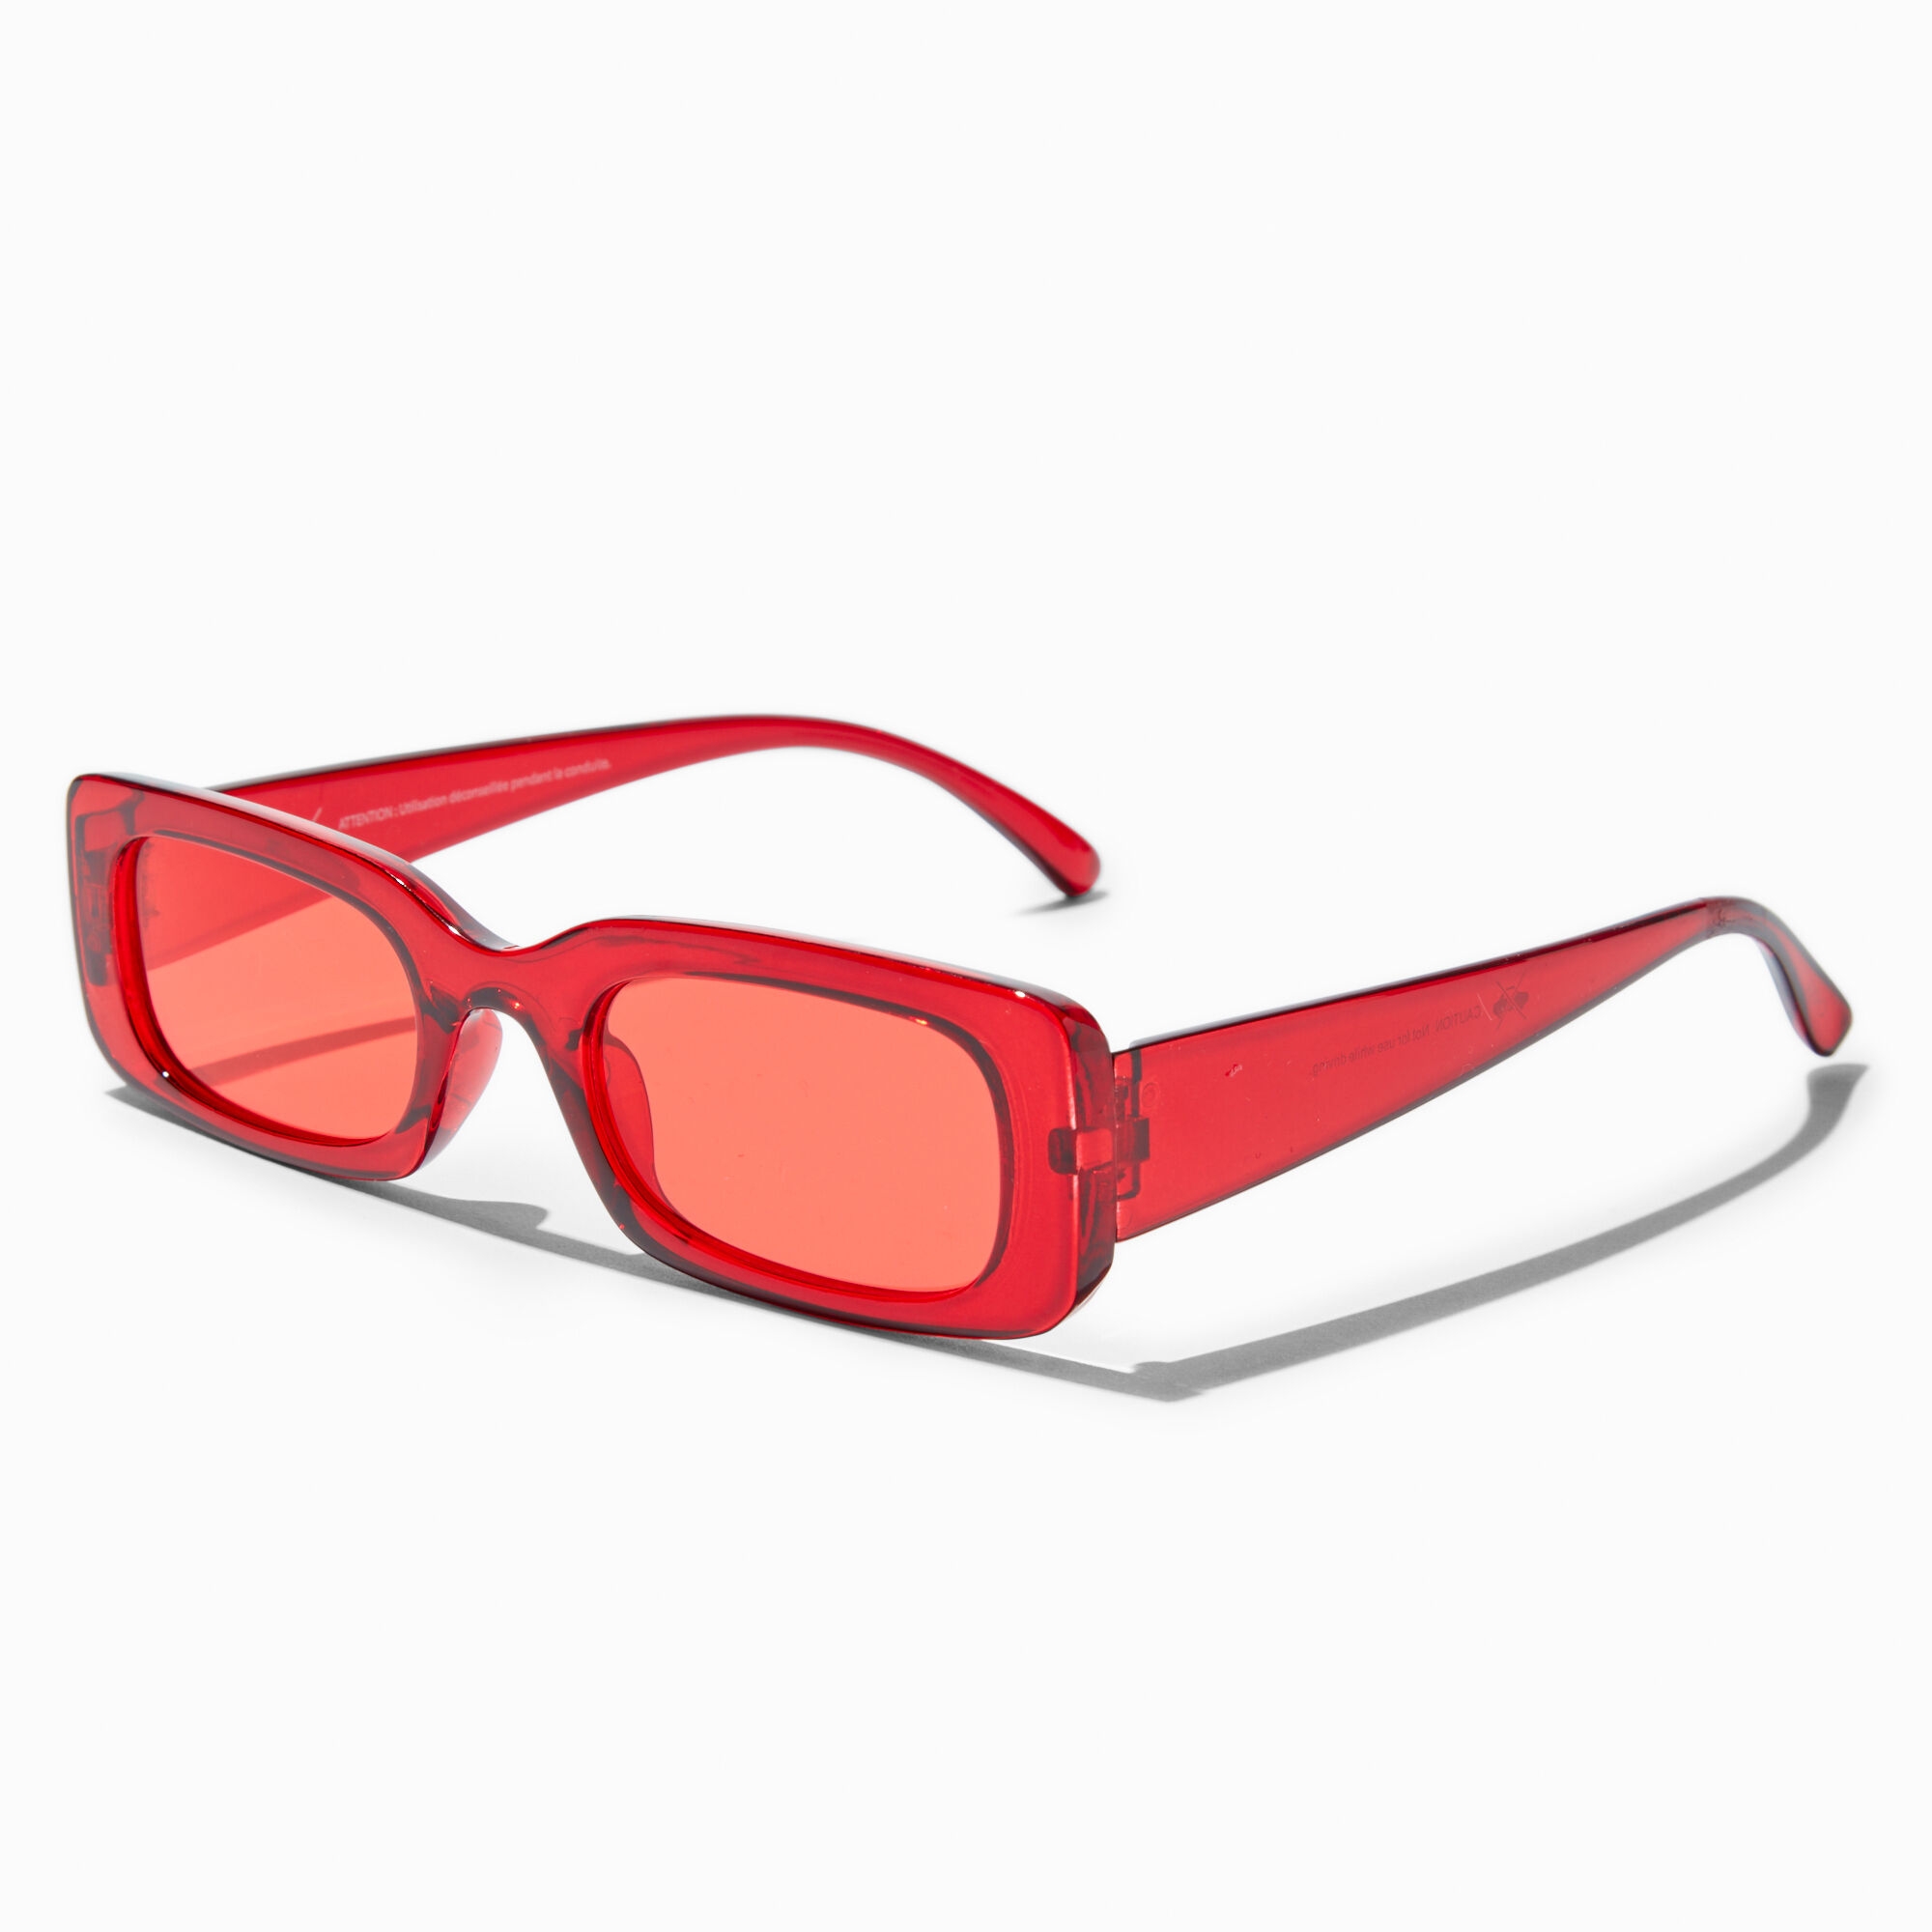 View Claires Translucent Rectangular Frame Sunglasses Red information